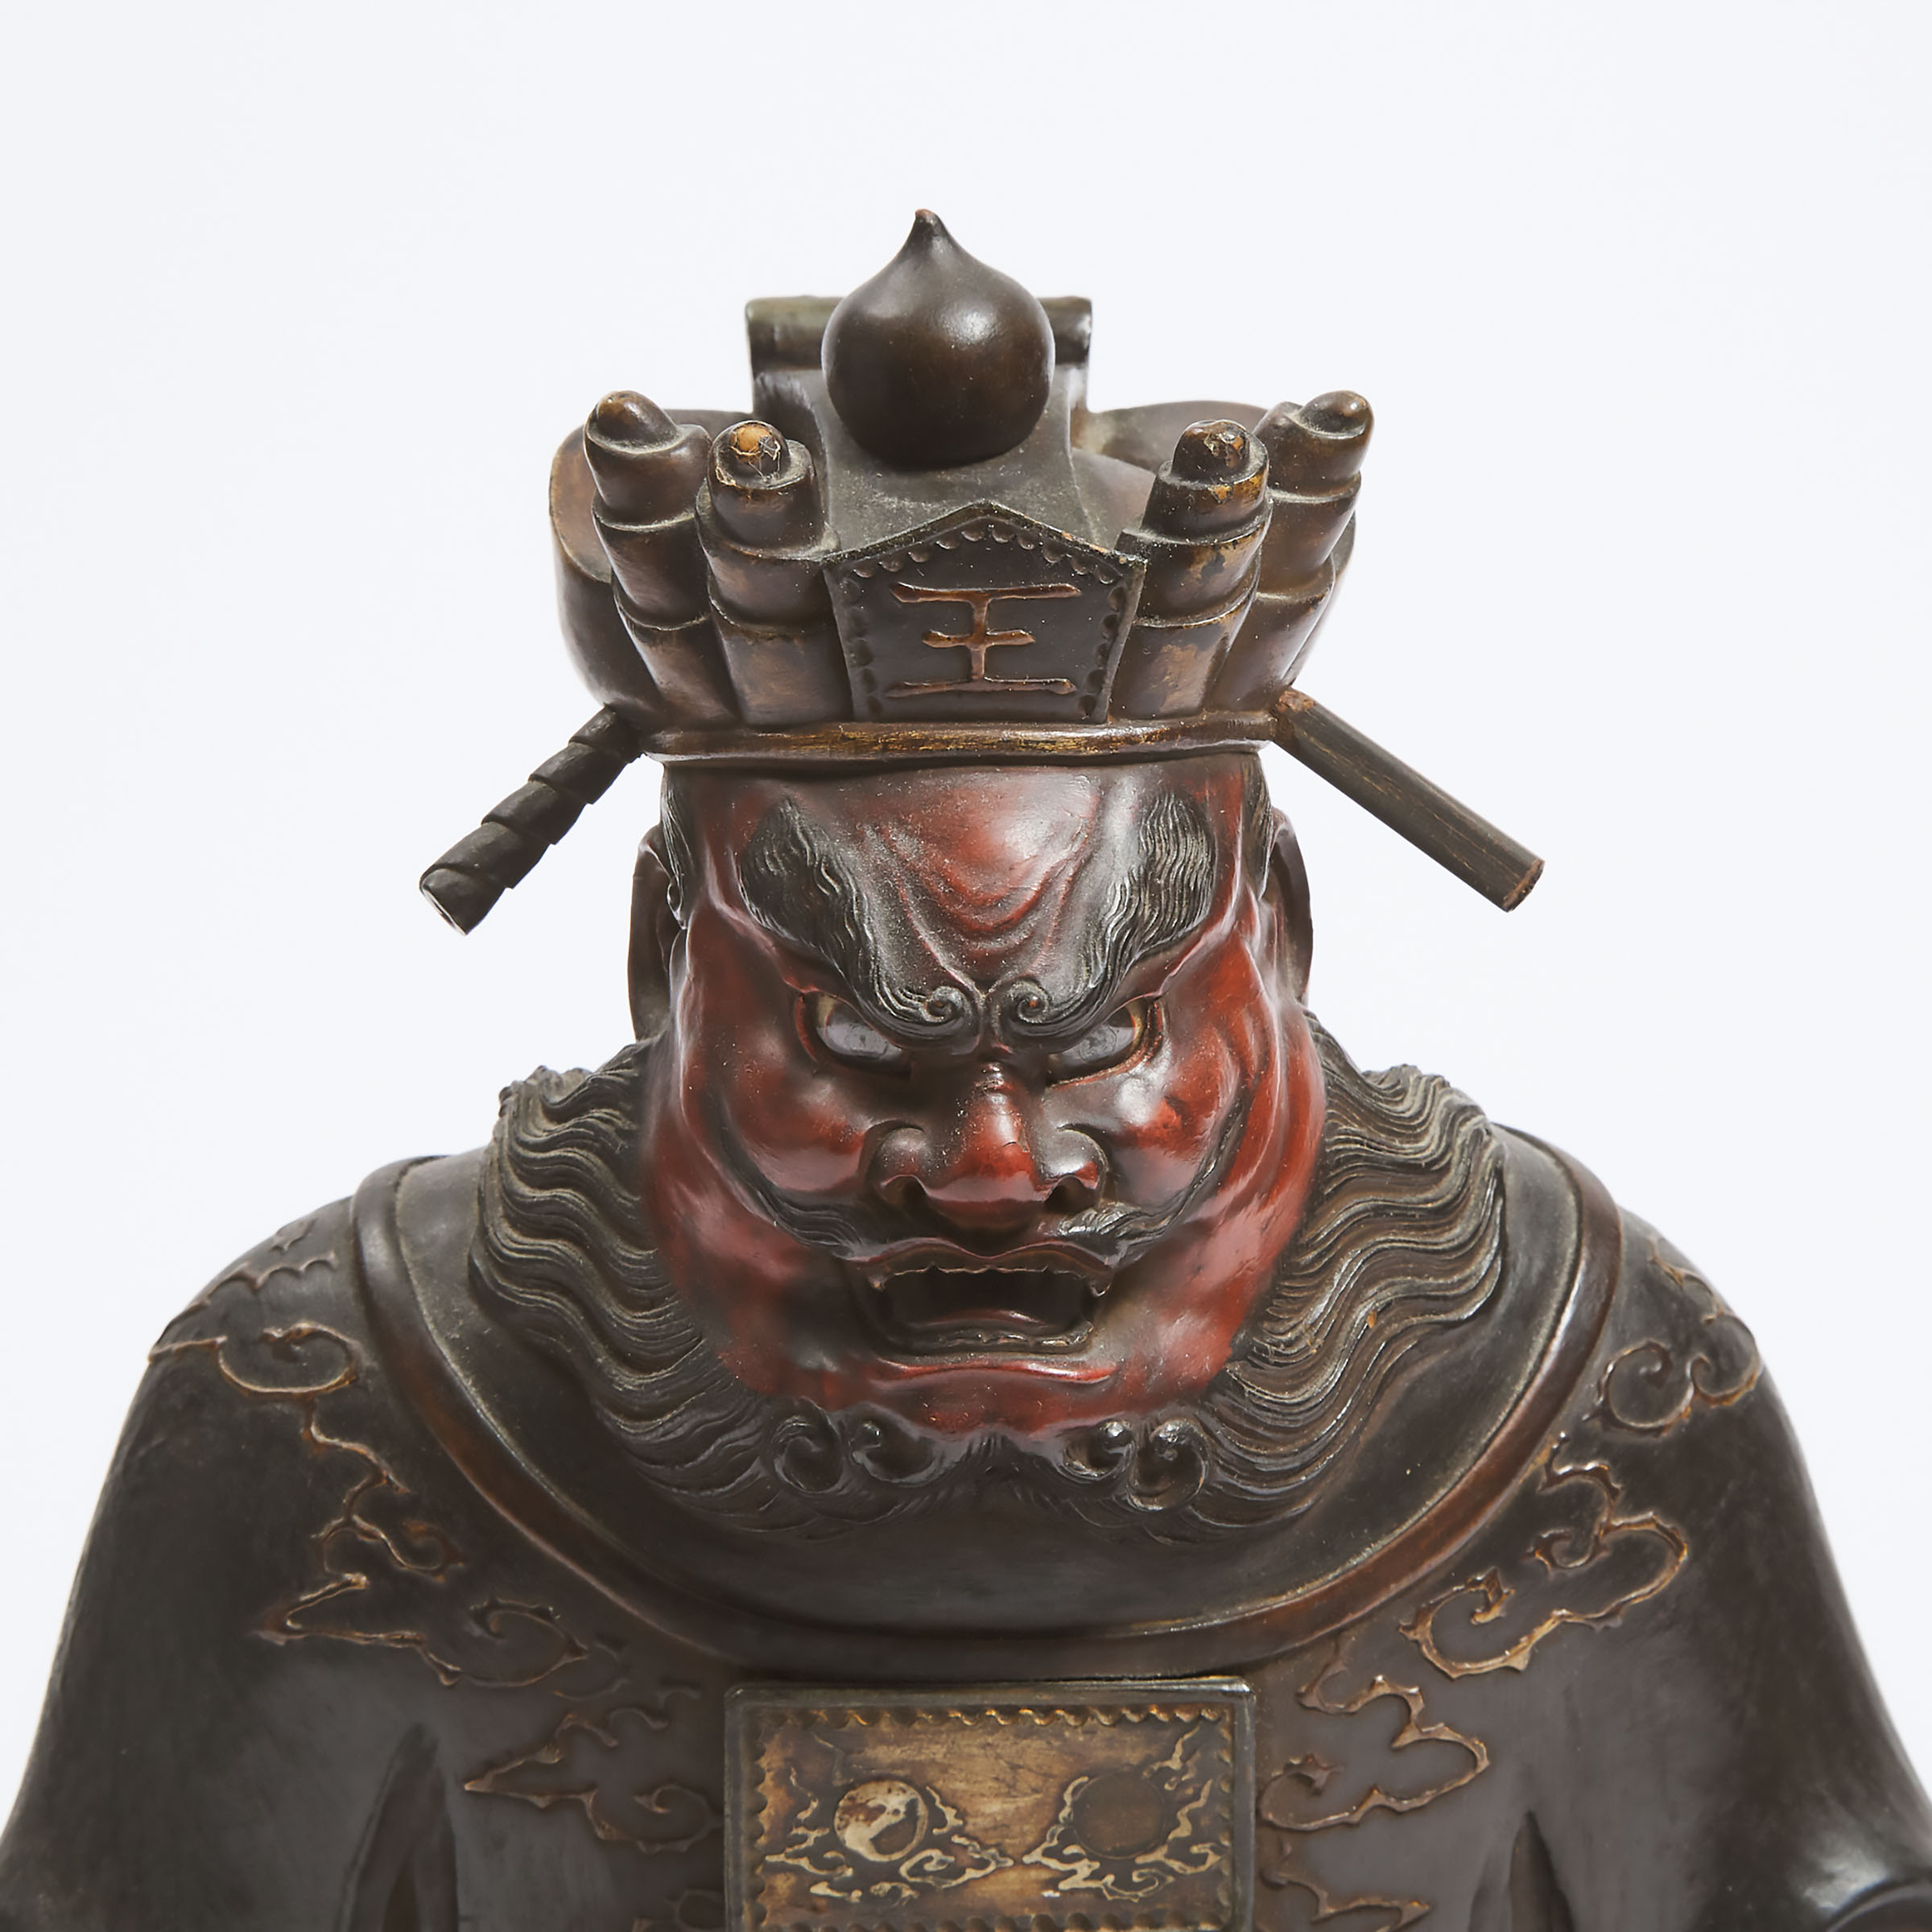 A Lacquered Wood Figure of Enma-o (The King of Hell), Meiji Period, Late 19th Century